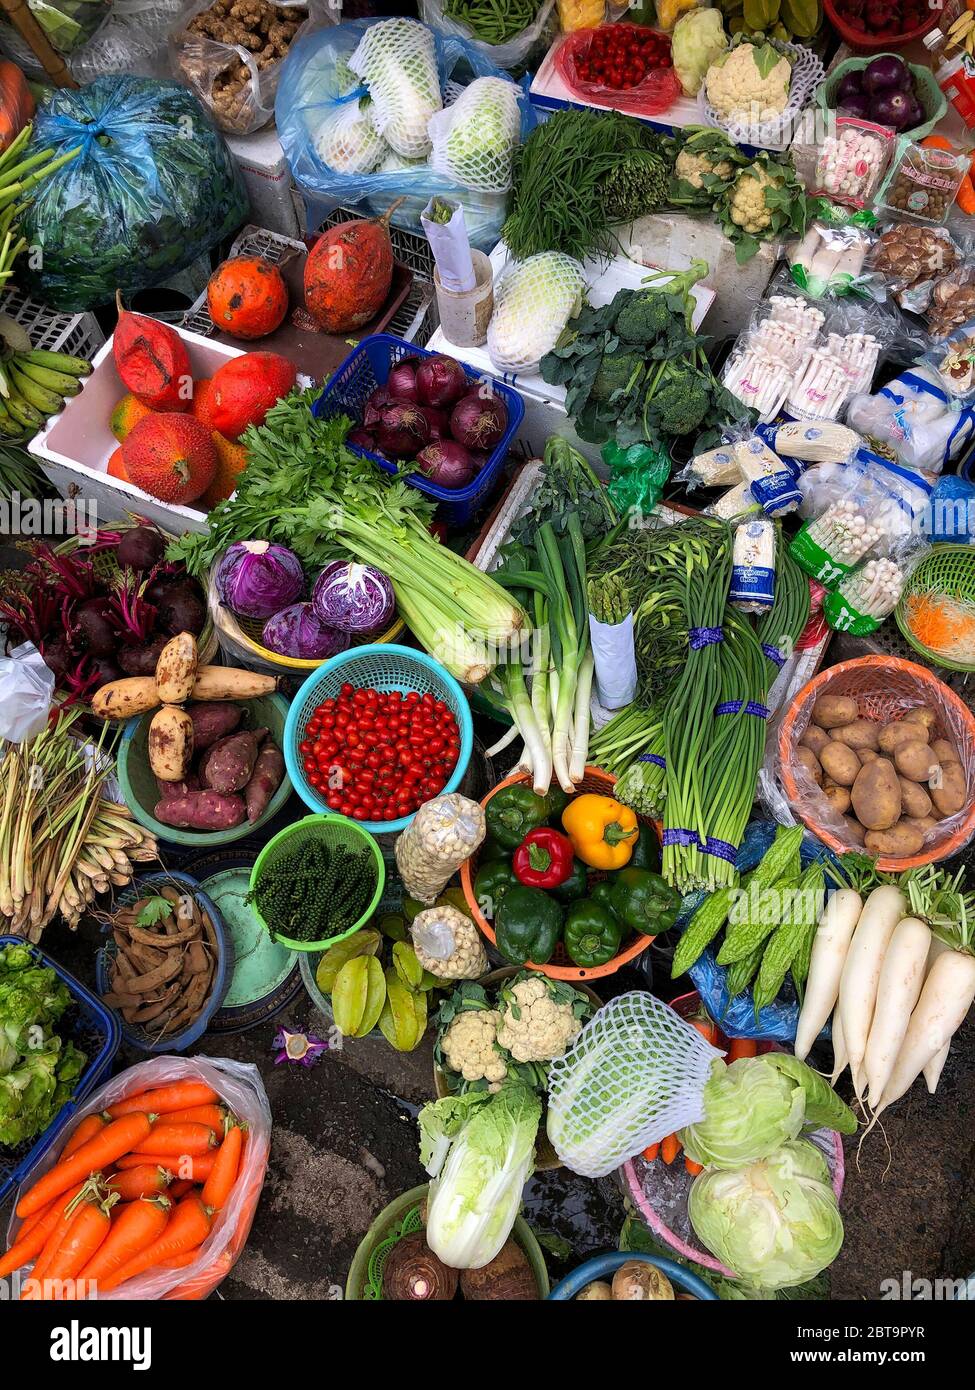 Top view on a large assortment of row loose vegetables and fruits for sale in a street. Short circuit production Stock Photo